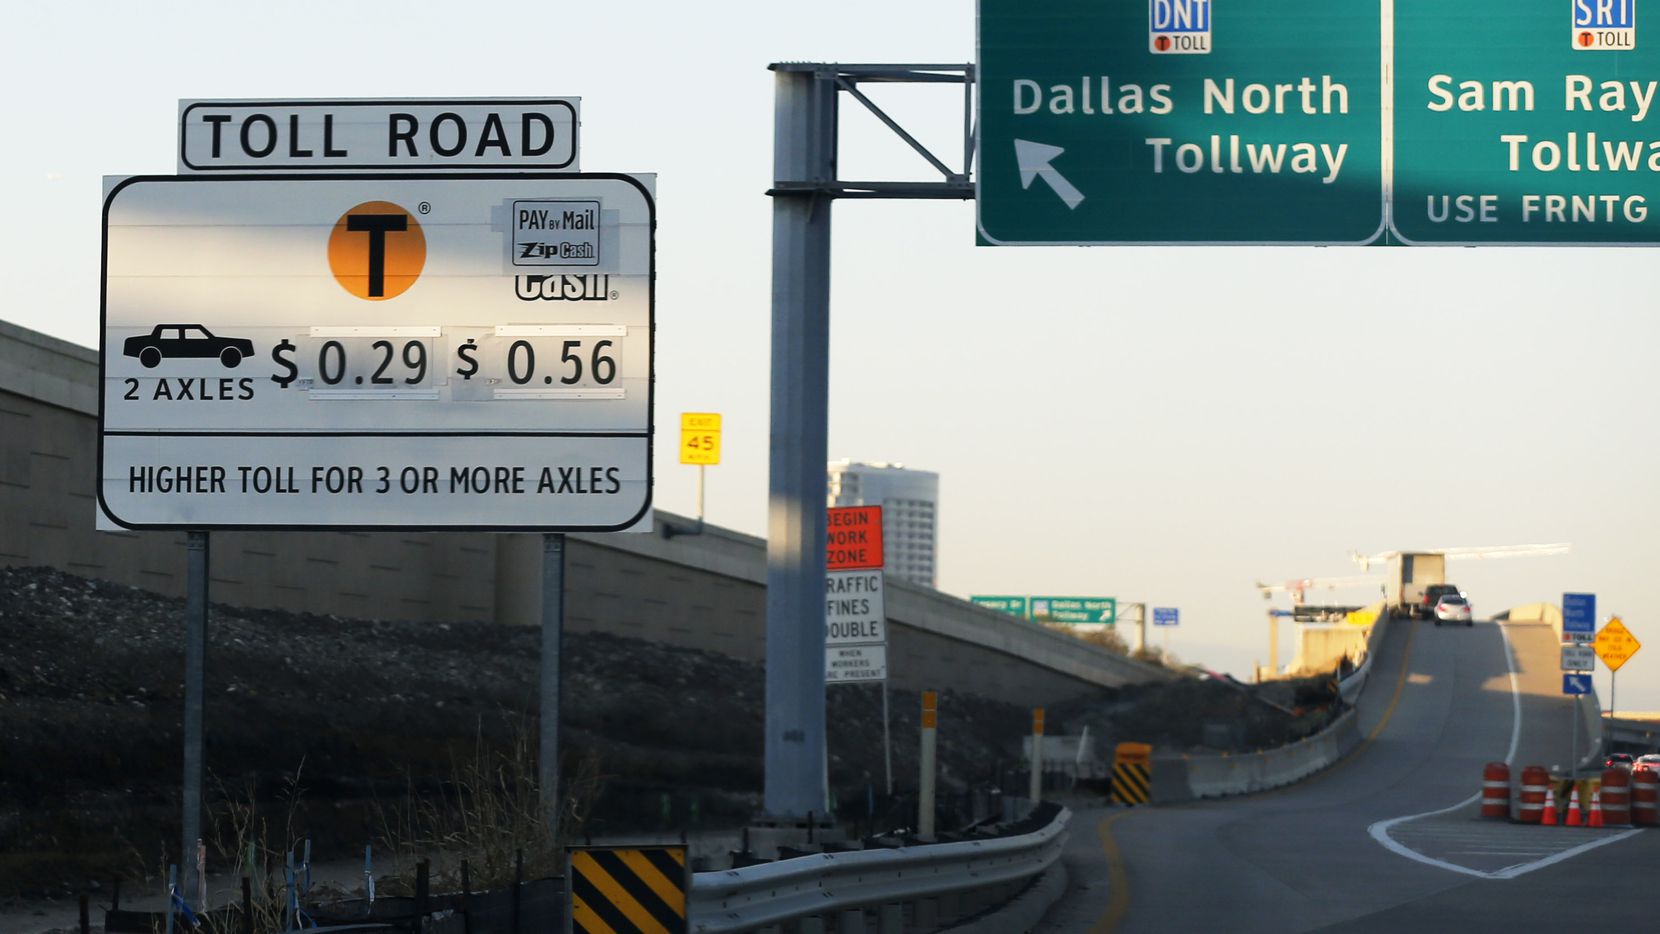 TXDOT Announces Annual Toll Rate Increase Effective January 2020